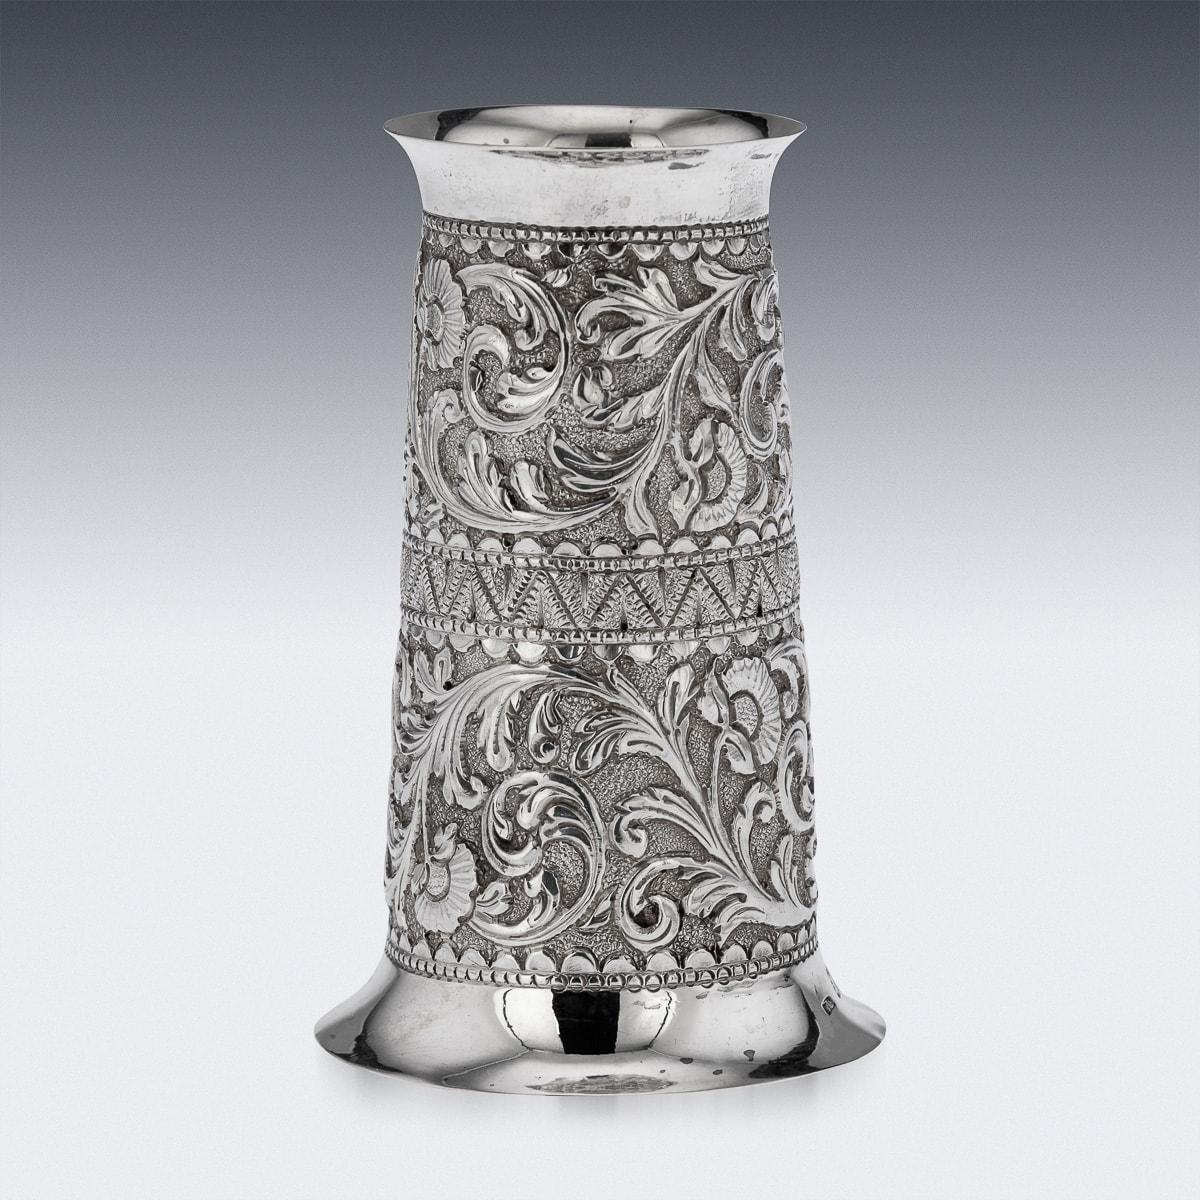 20th Century Edwardian Solid Silver Spirit Measure Cup, London, c.1901 For Sale 1